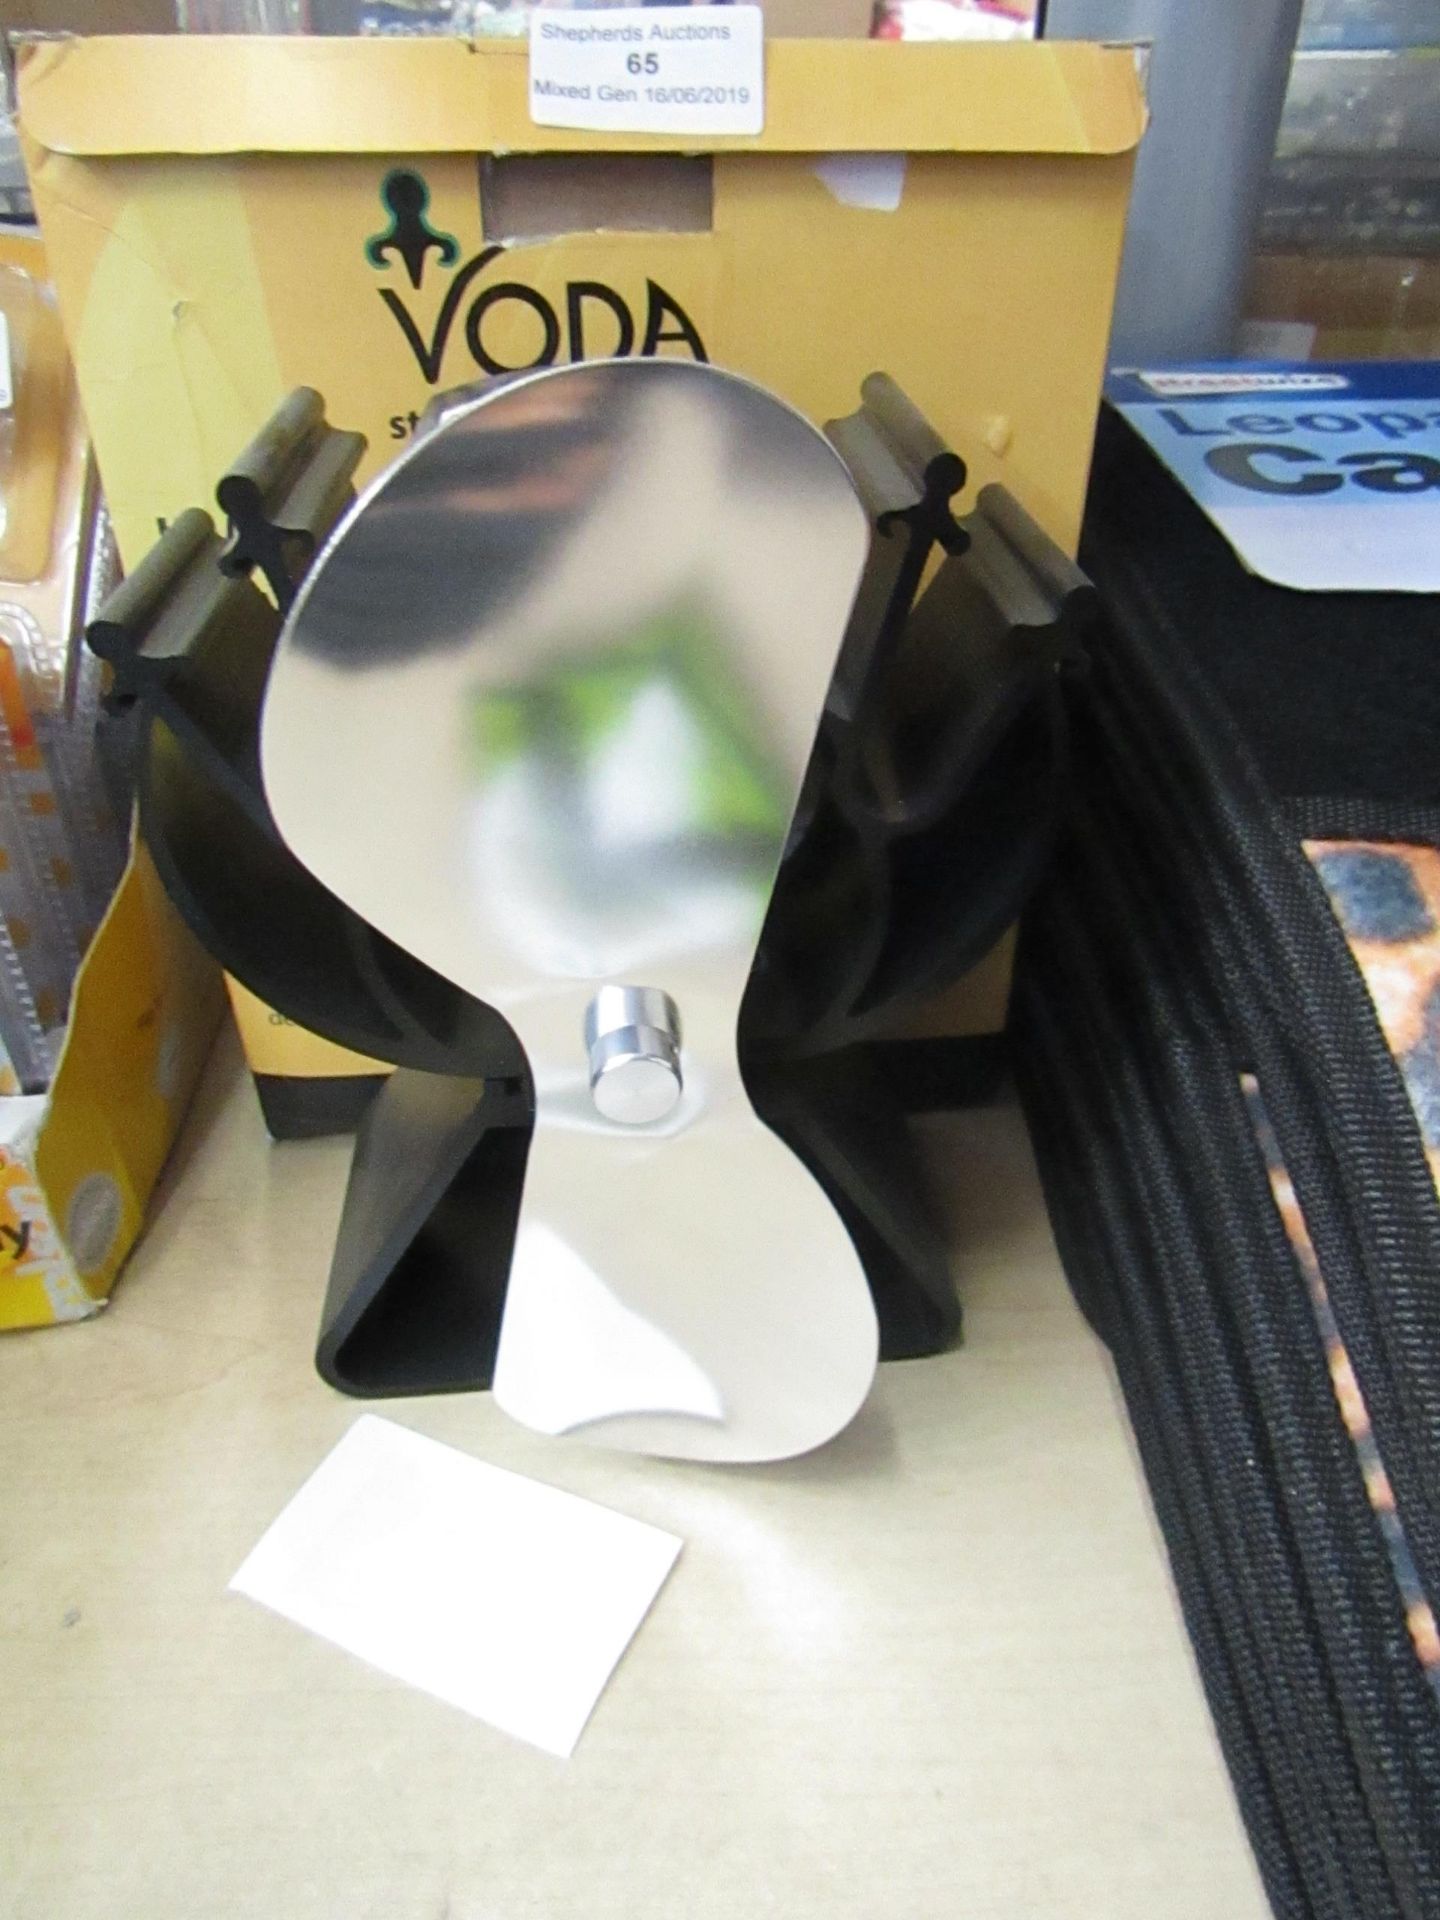 Voda Heat Power stove/wood burner Fan, powered by the heat of the fire it helps blow the hot air